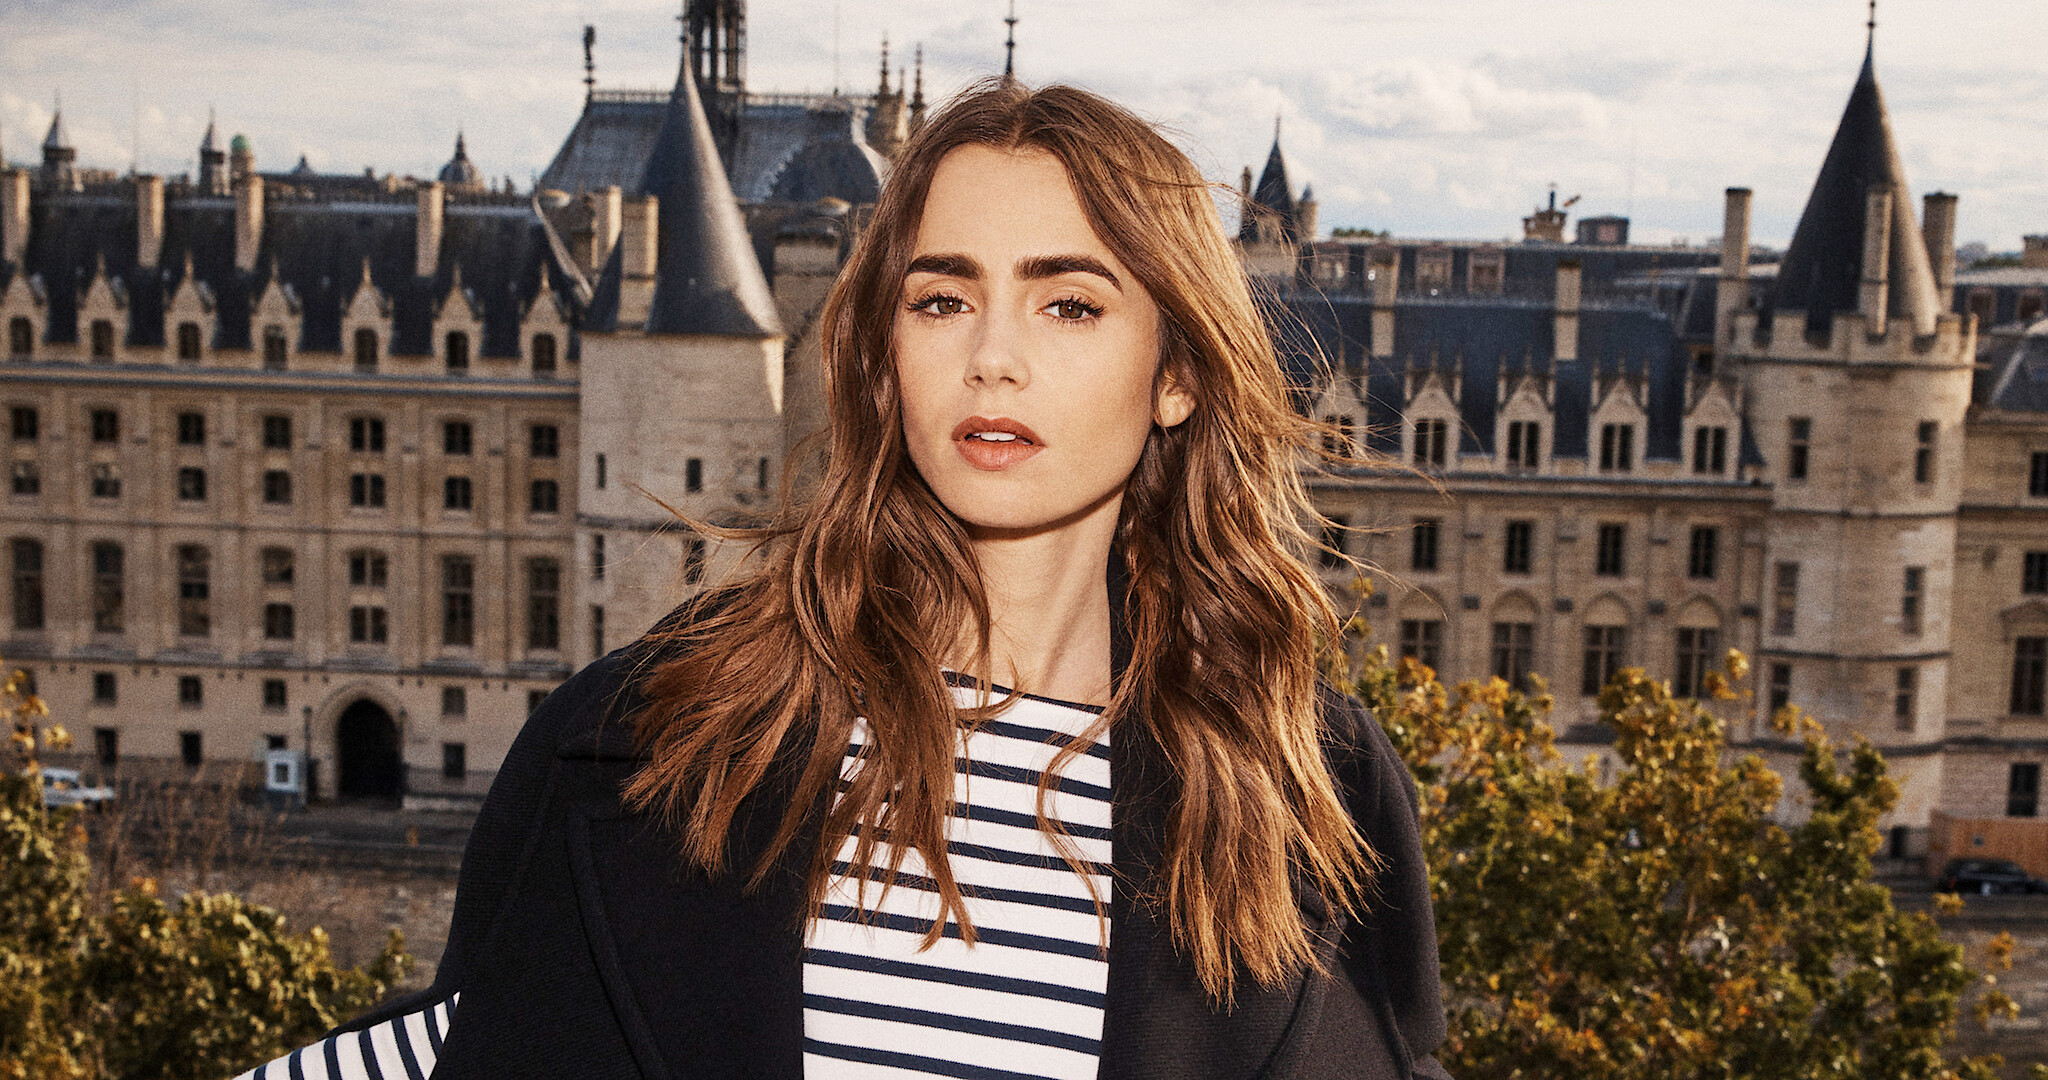 Emily In Paris' Cast - Meet the Characters of Netflix's 'Emily In